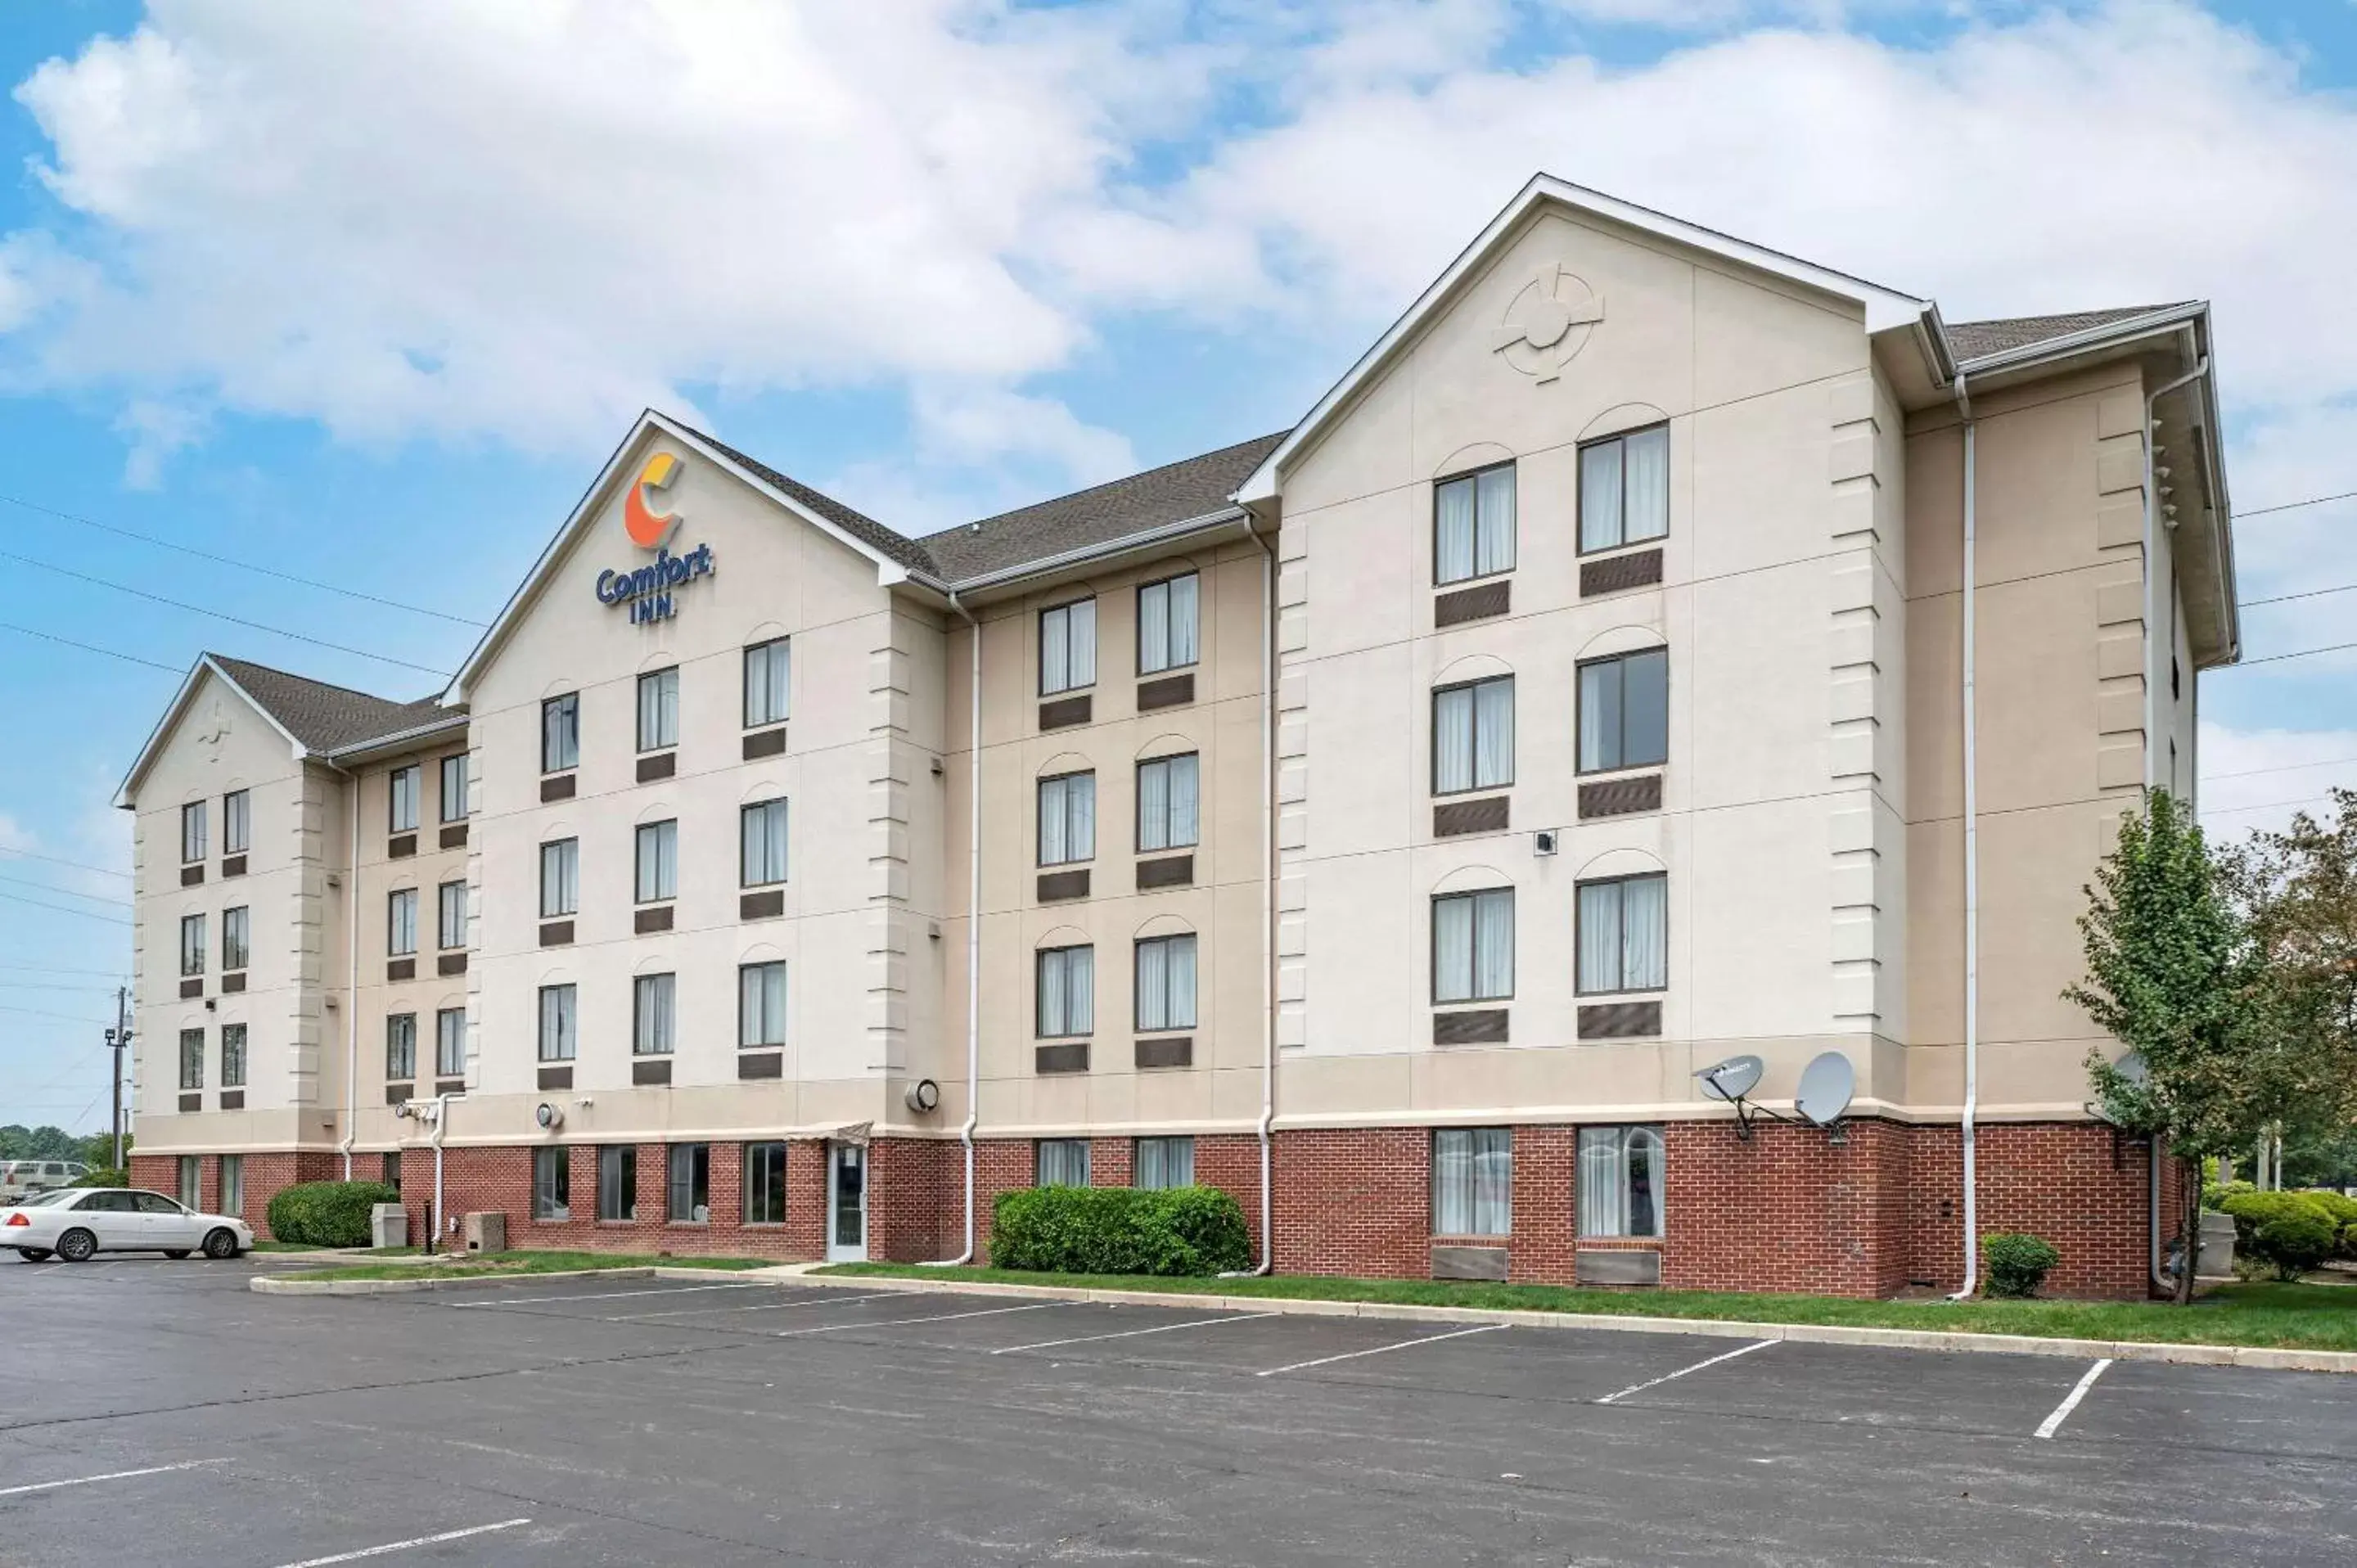 On site, Property Building in Comfort Inn Indianapolis East